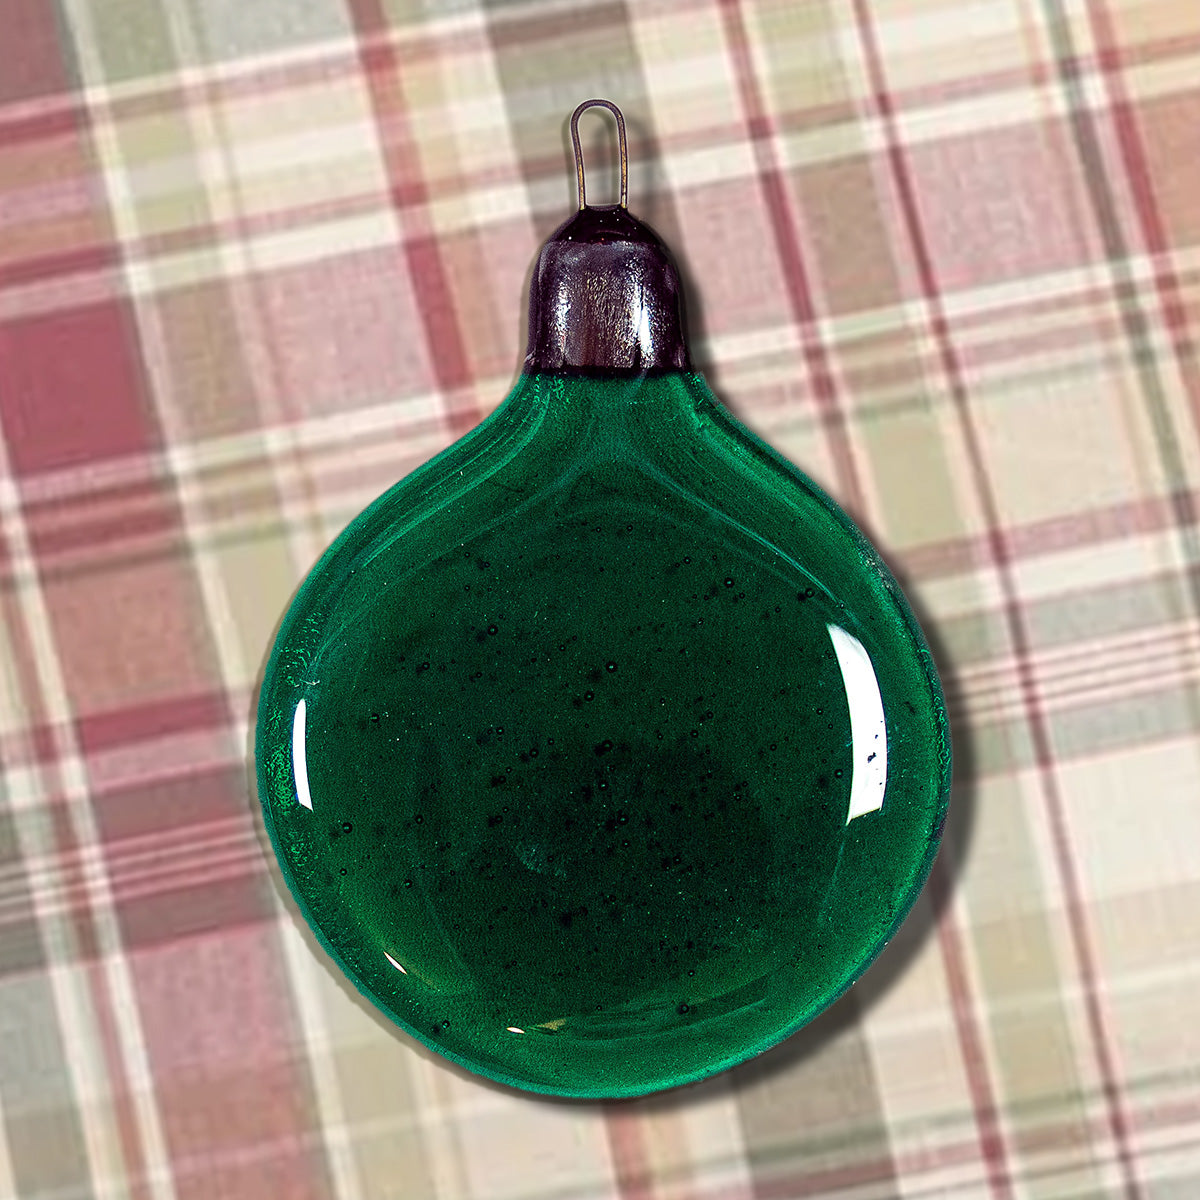 Easy Fused Glass Ornaments